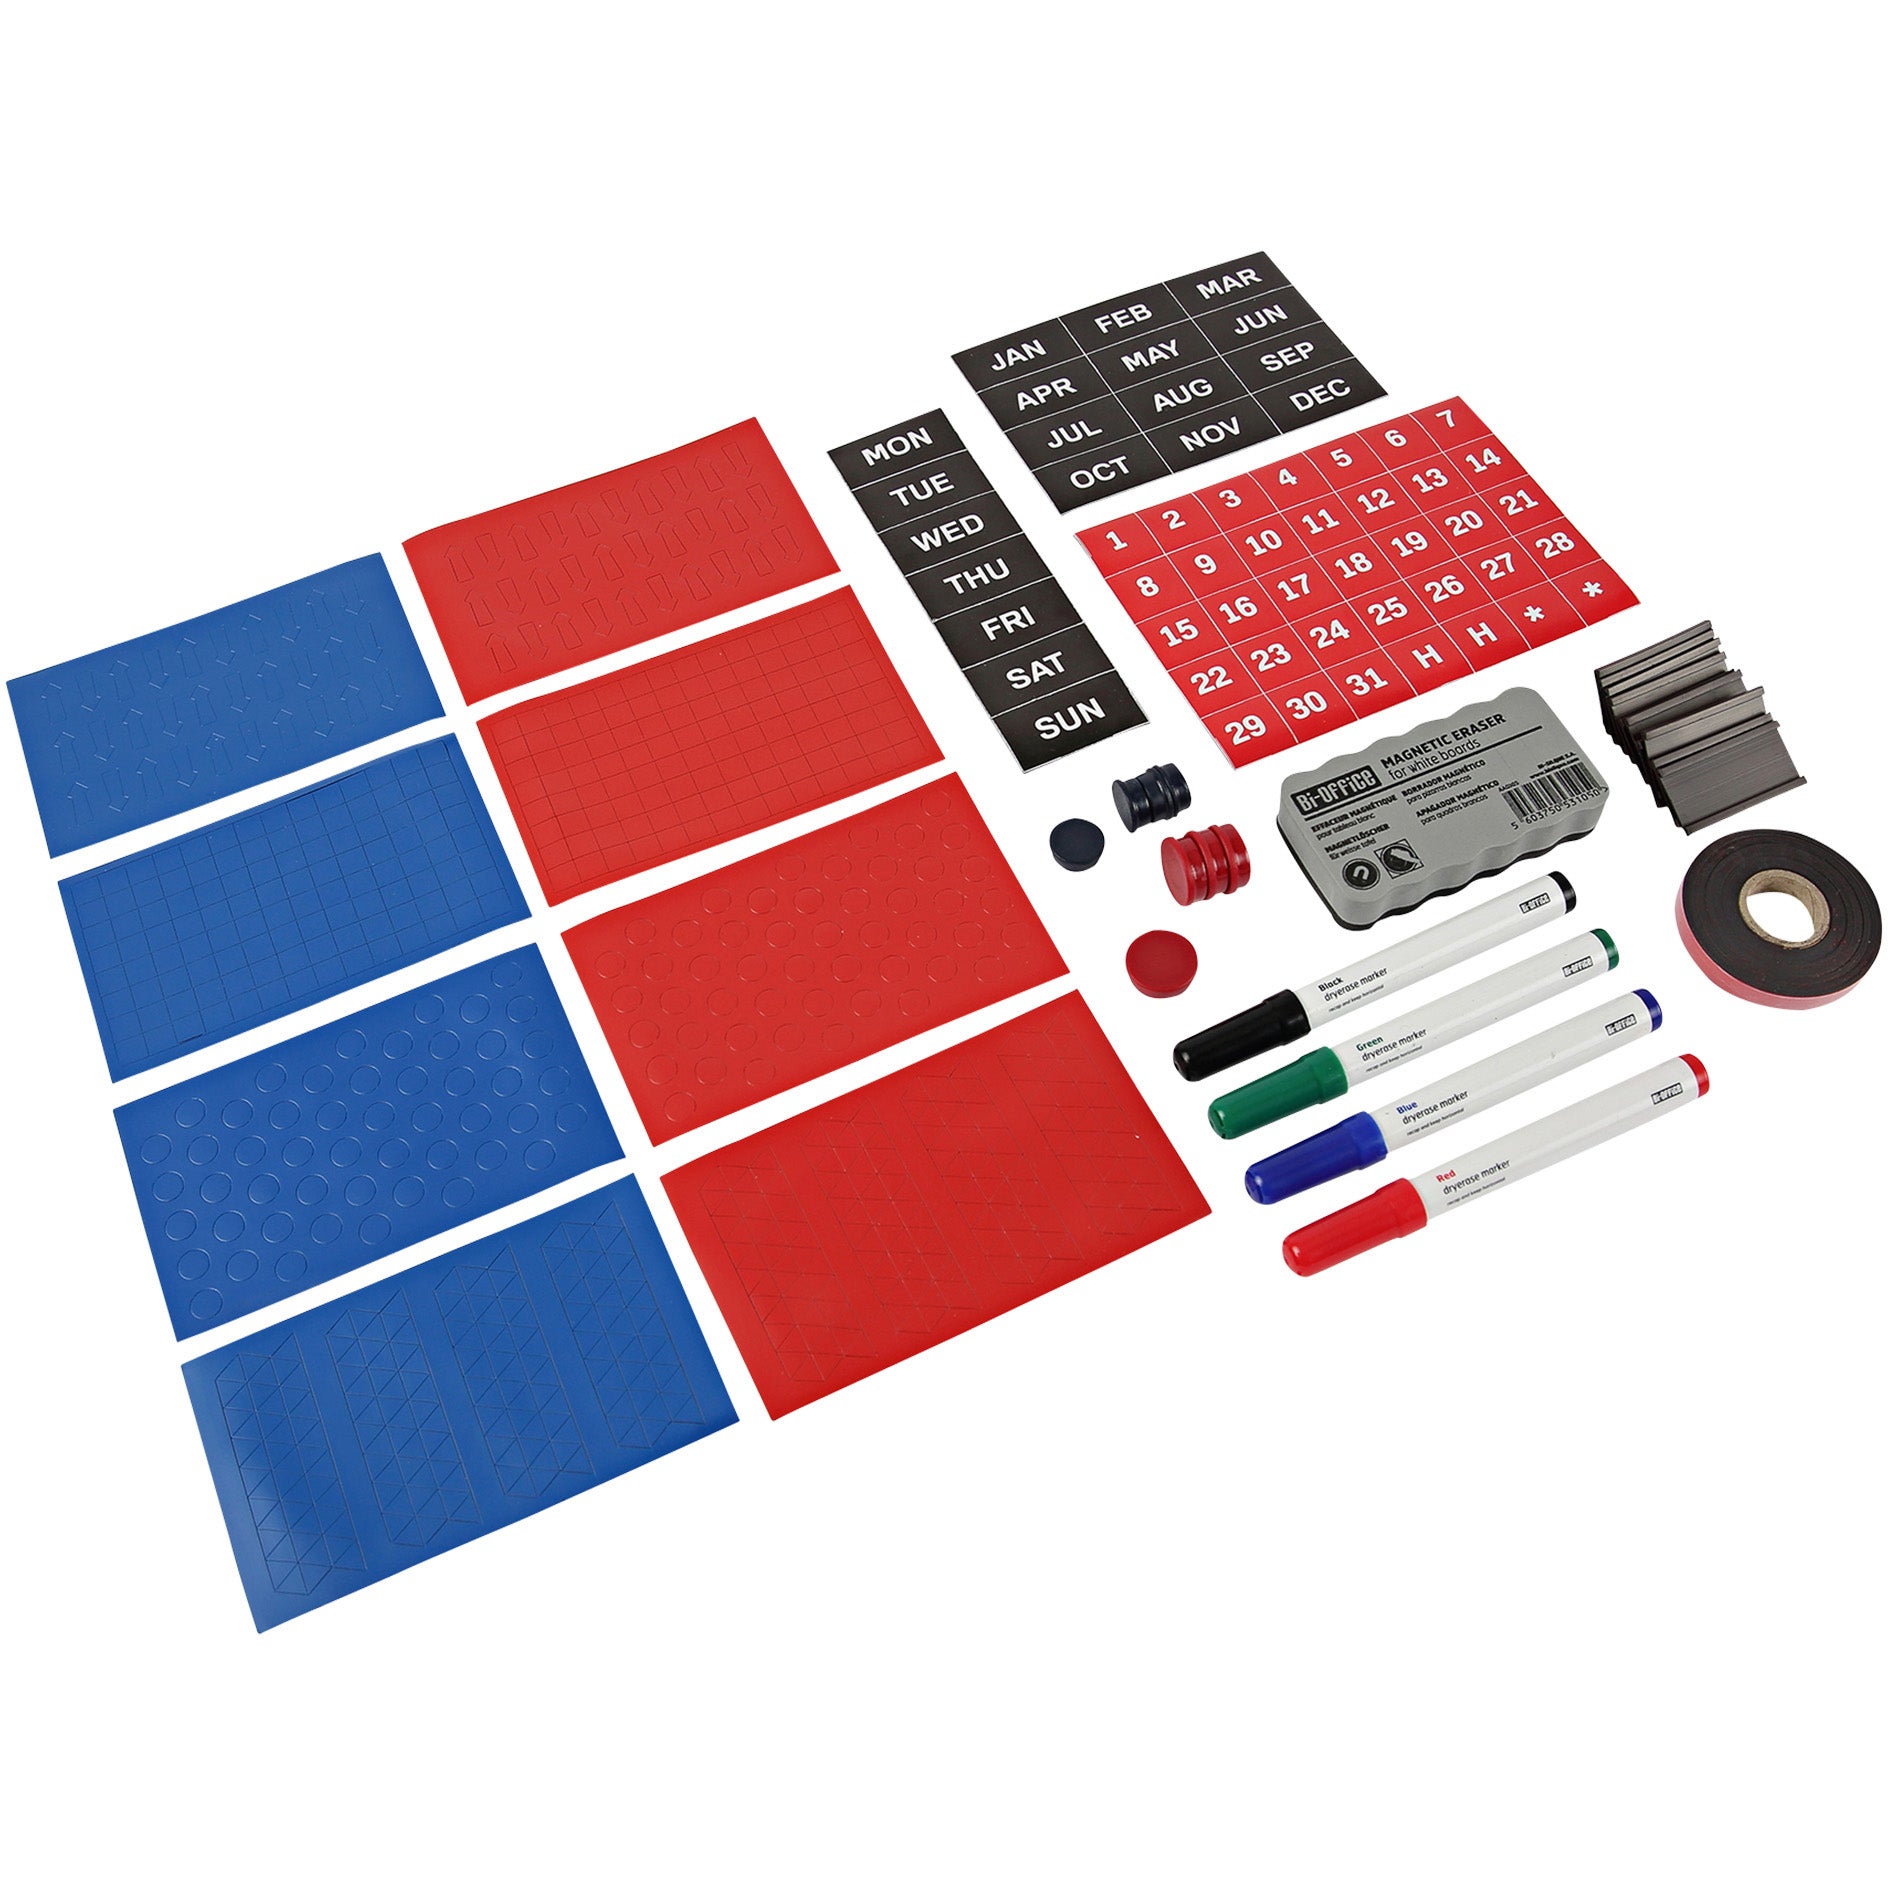 KT1416 Magnetic Planning & Organization Kit for Whiteboards, Includes Date Magnets, Magnetic Tape, Dry Erase Markers & More by MasterVision